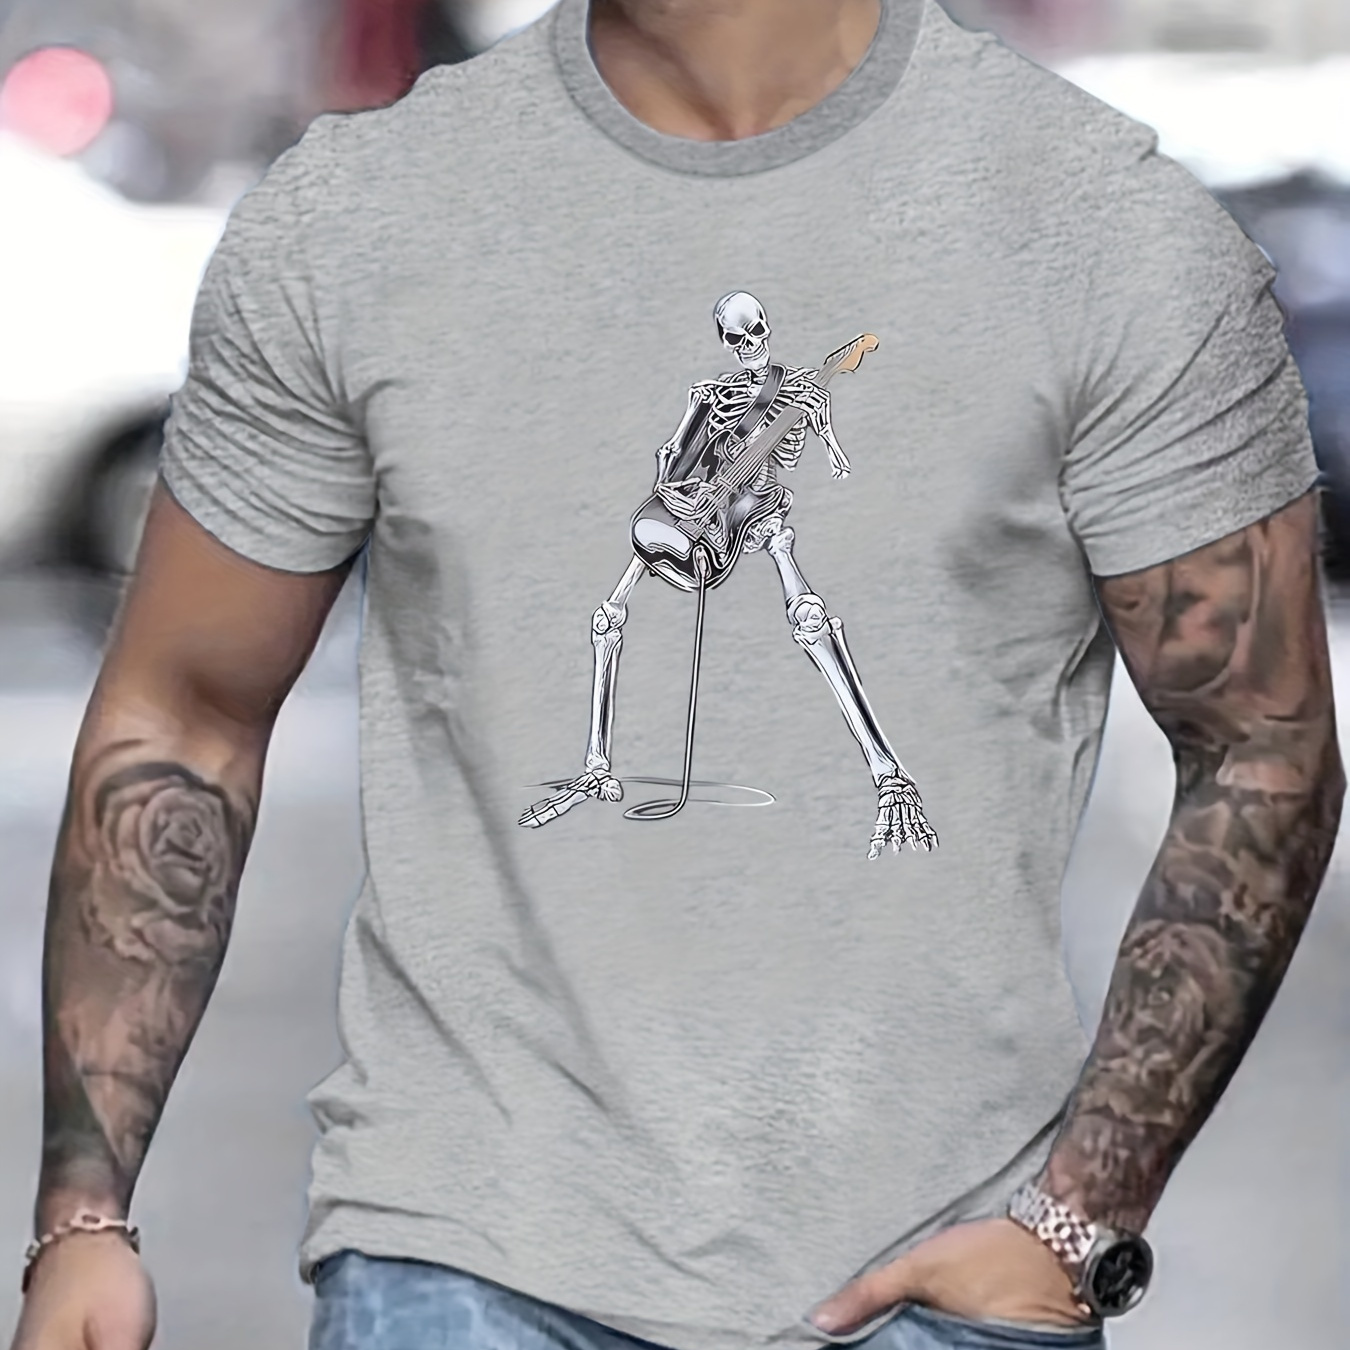 

Cartoon Skeleton Playing The Guitar Graphic Print, Men's Novel Graphic Design T-shirt, Casual Comfy Tees For Summer, Men's Clothing Tops For Daily Activities